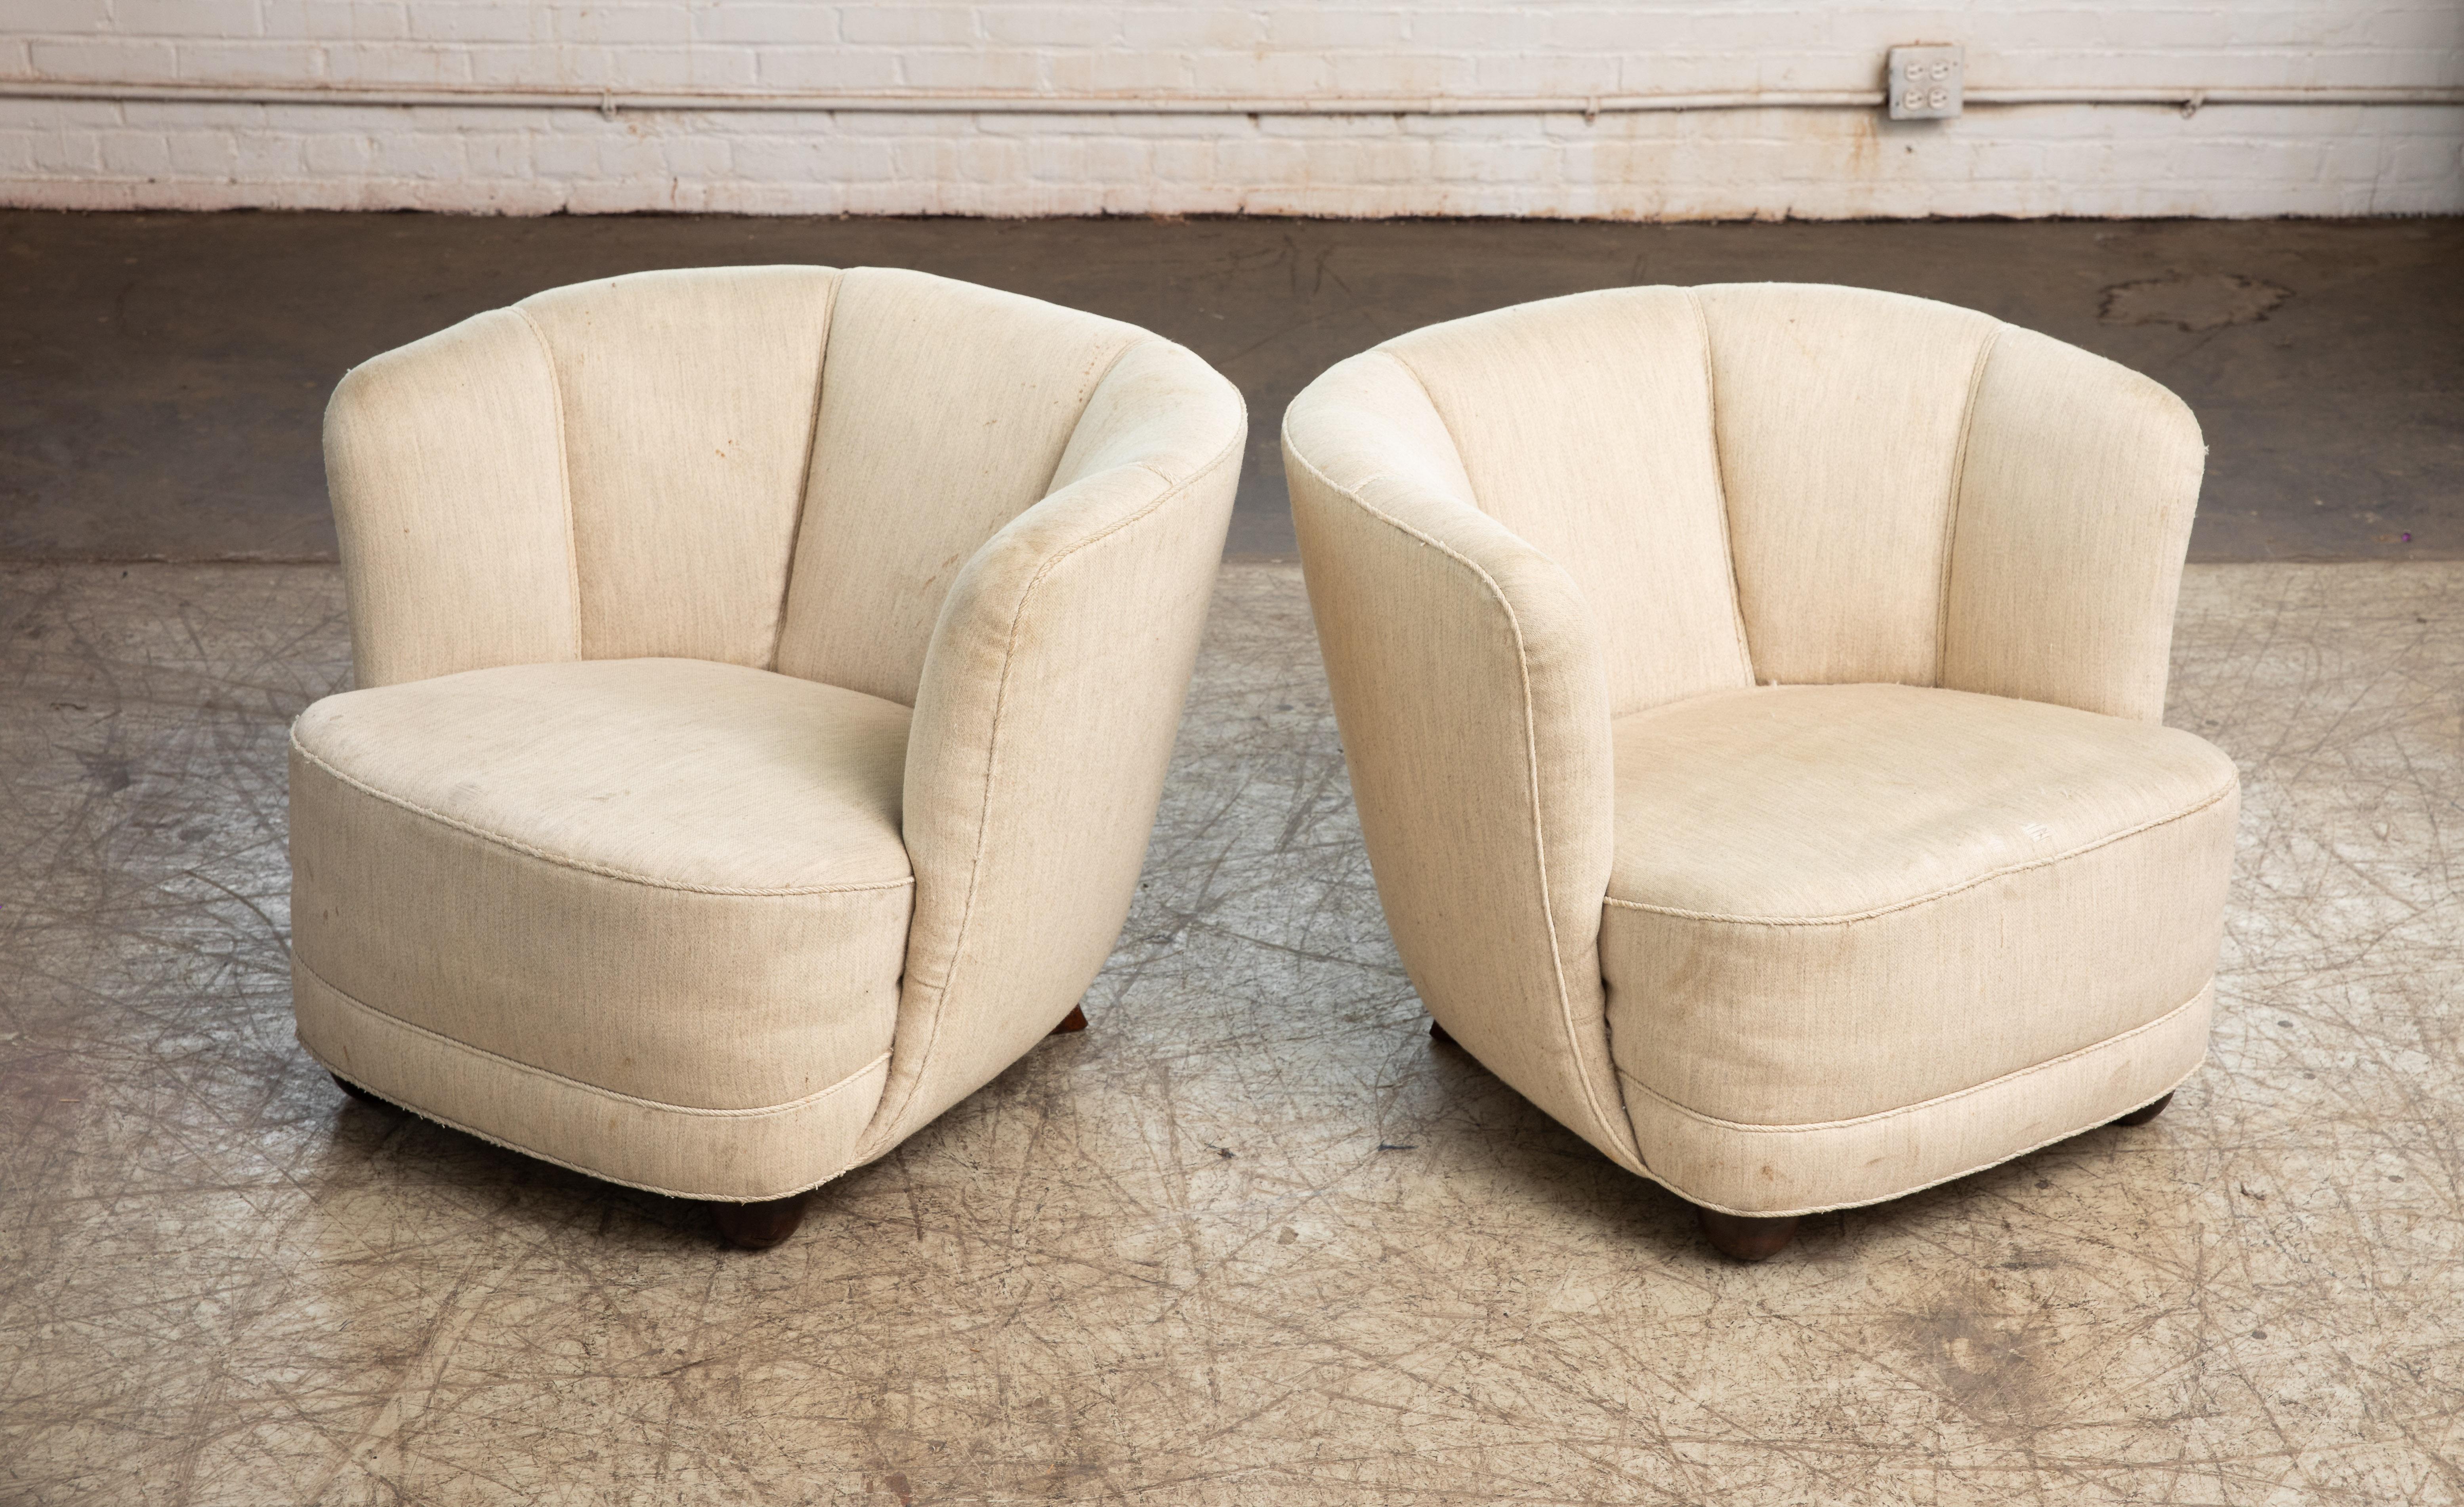 Incredibly comfortable, exuberant, and superbly made pair of Danish lounge chairs perfectly capturing the essence of 1940s Danish design coming out of the Art Deco era and into the midcentury. The curved backrests and low slung proportions and block